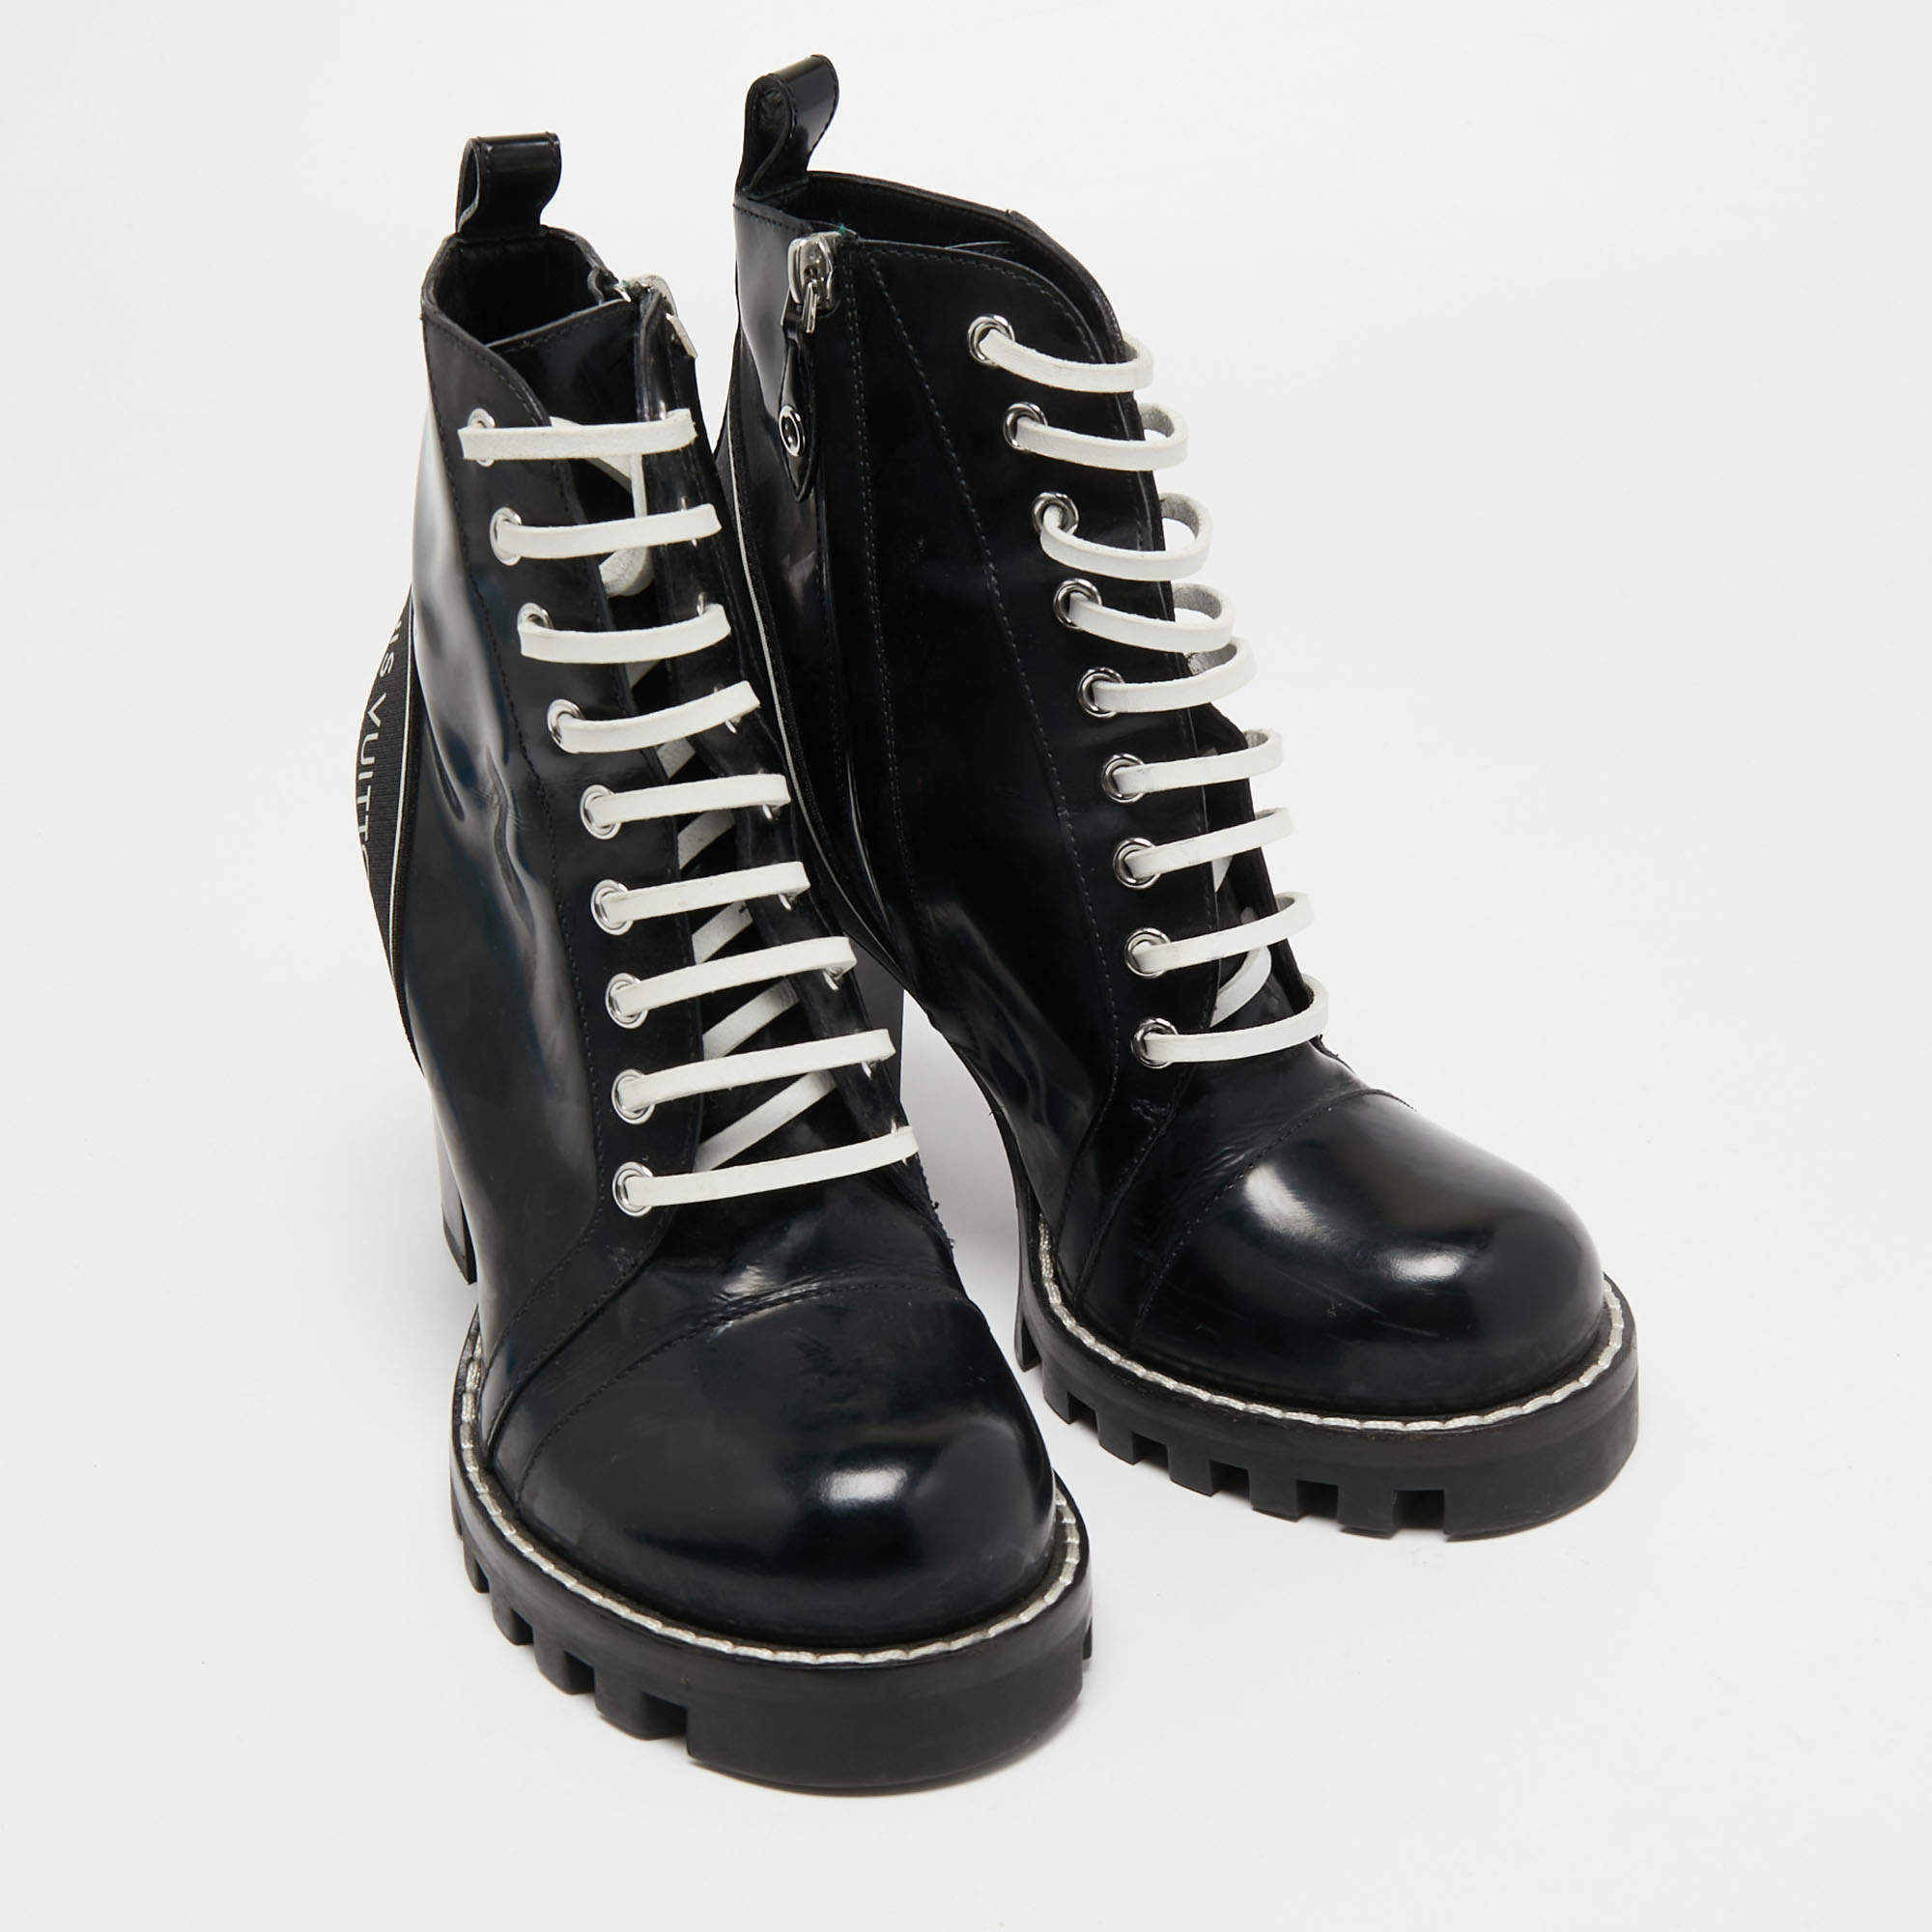 Star trail leather lace up boots Louis Vuitton Black size 38 EU in Leather  - 31816410